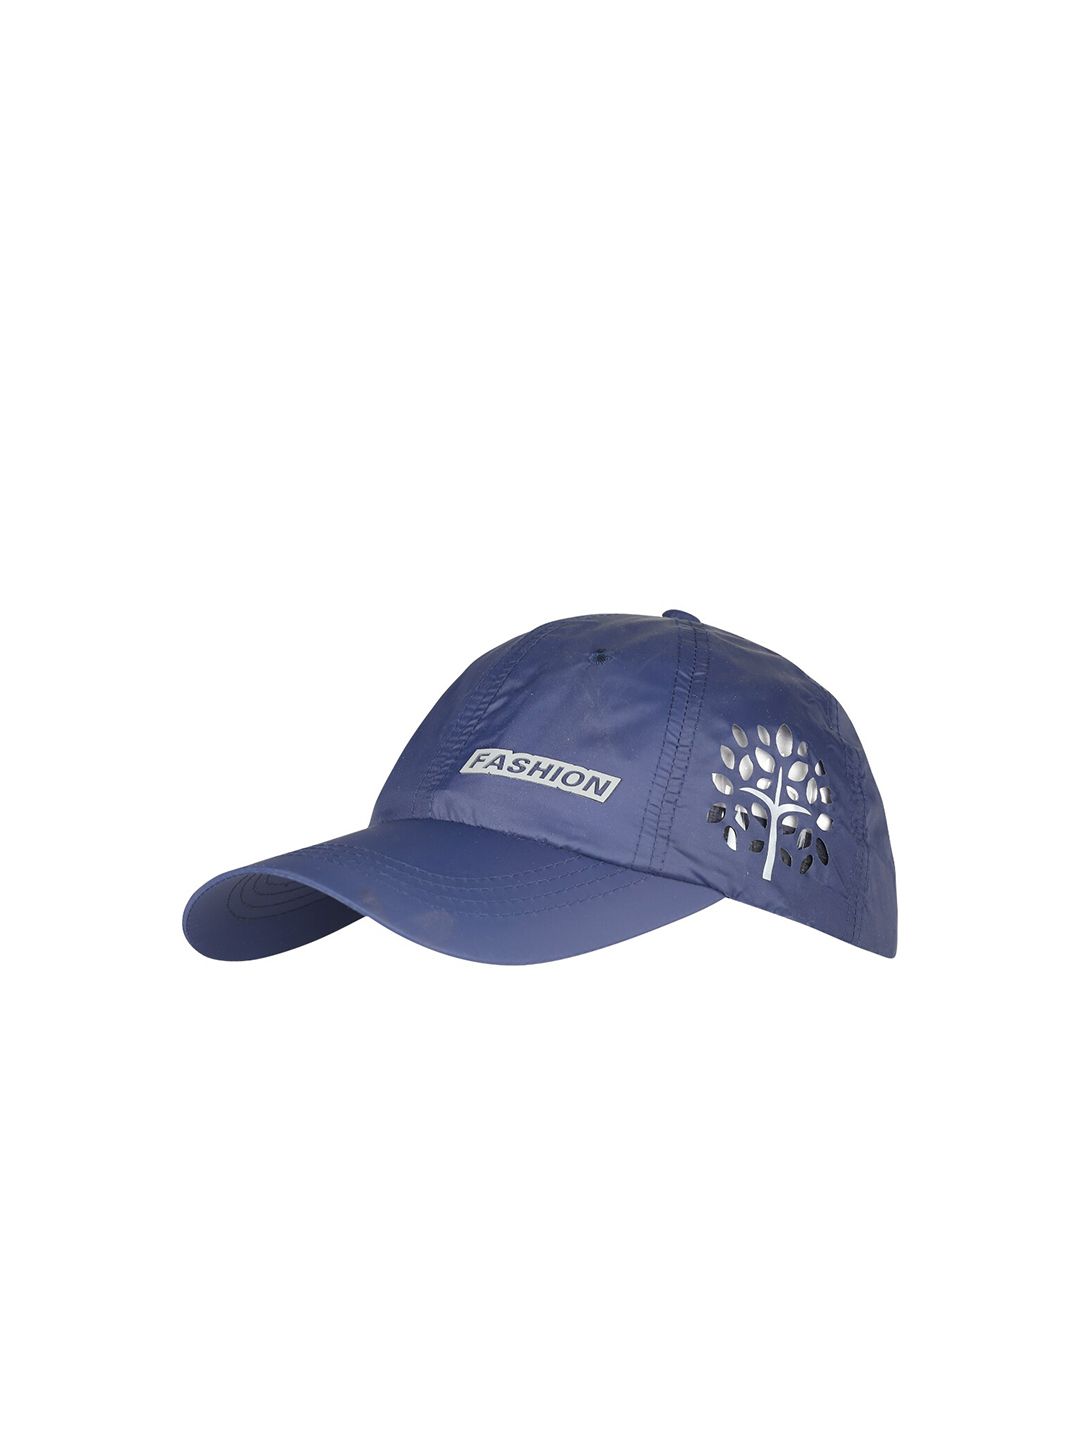 iSWEVEN Unisex Blue & White Printed Snapback Cap Price in India